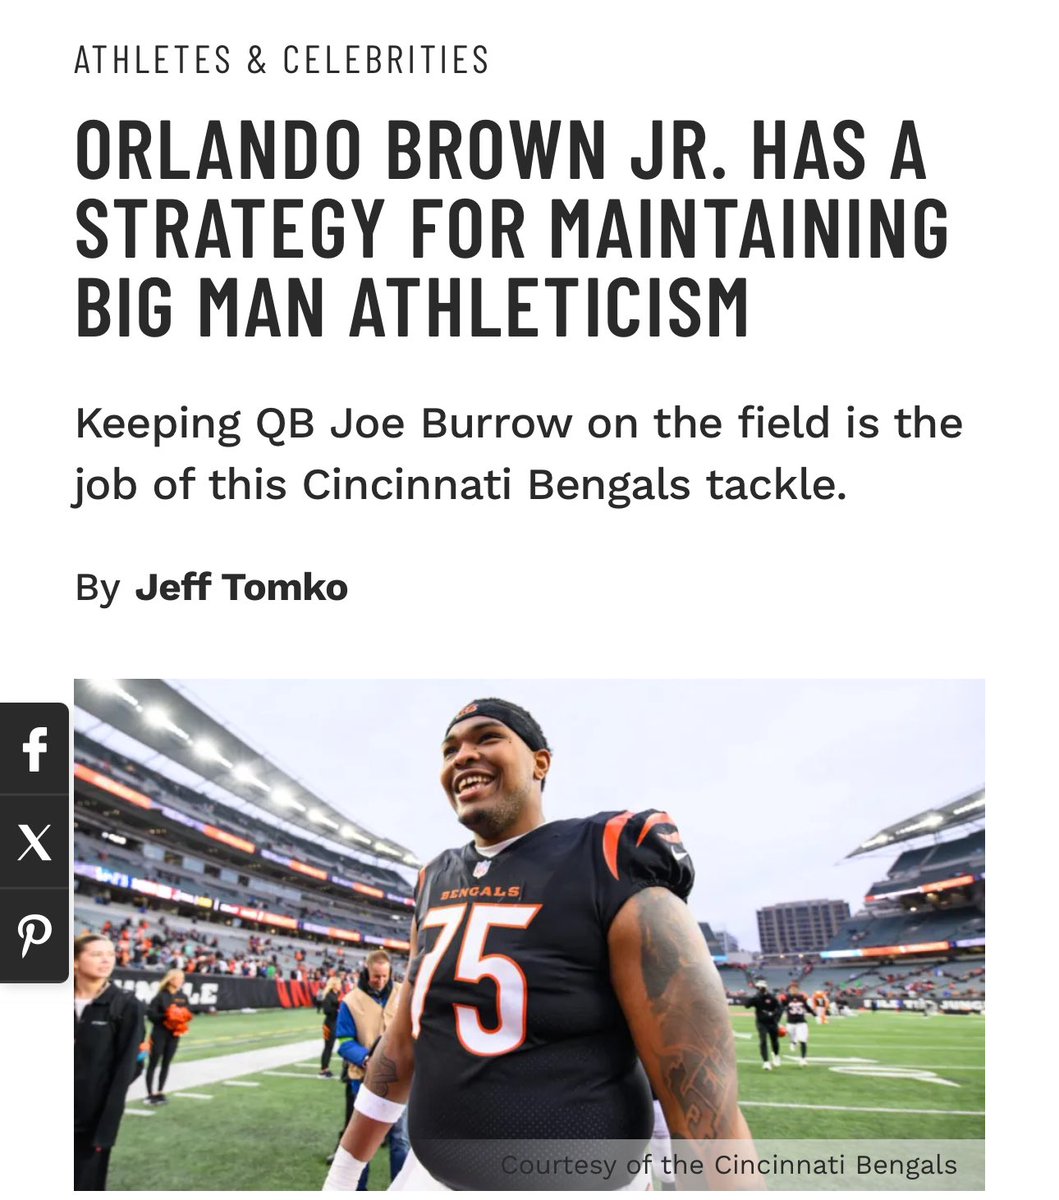 ORLANDO BROWN JR. HAS A STRATEGY FOR MAINTAINING BIG MAN ATHLETICISM Keeping QB Joe Burrow on the field is the job of this Cincinnati Bengals tackle. By Jeff Tomko @JeffTomko Read Article: muscleandfitness.com @muscle_fitness